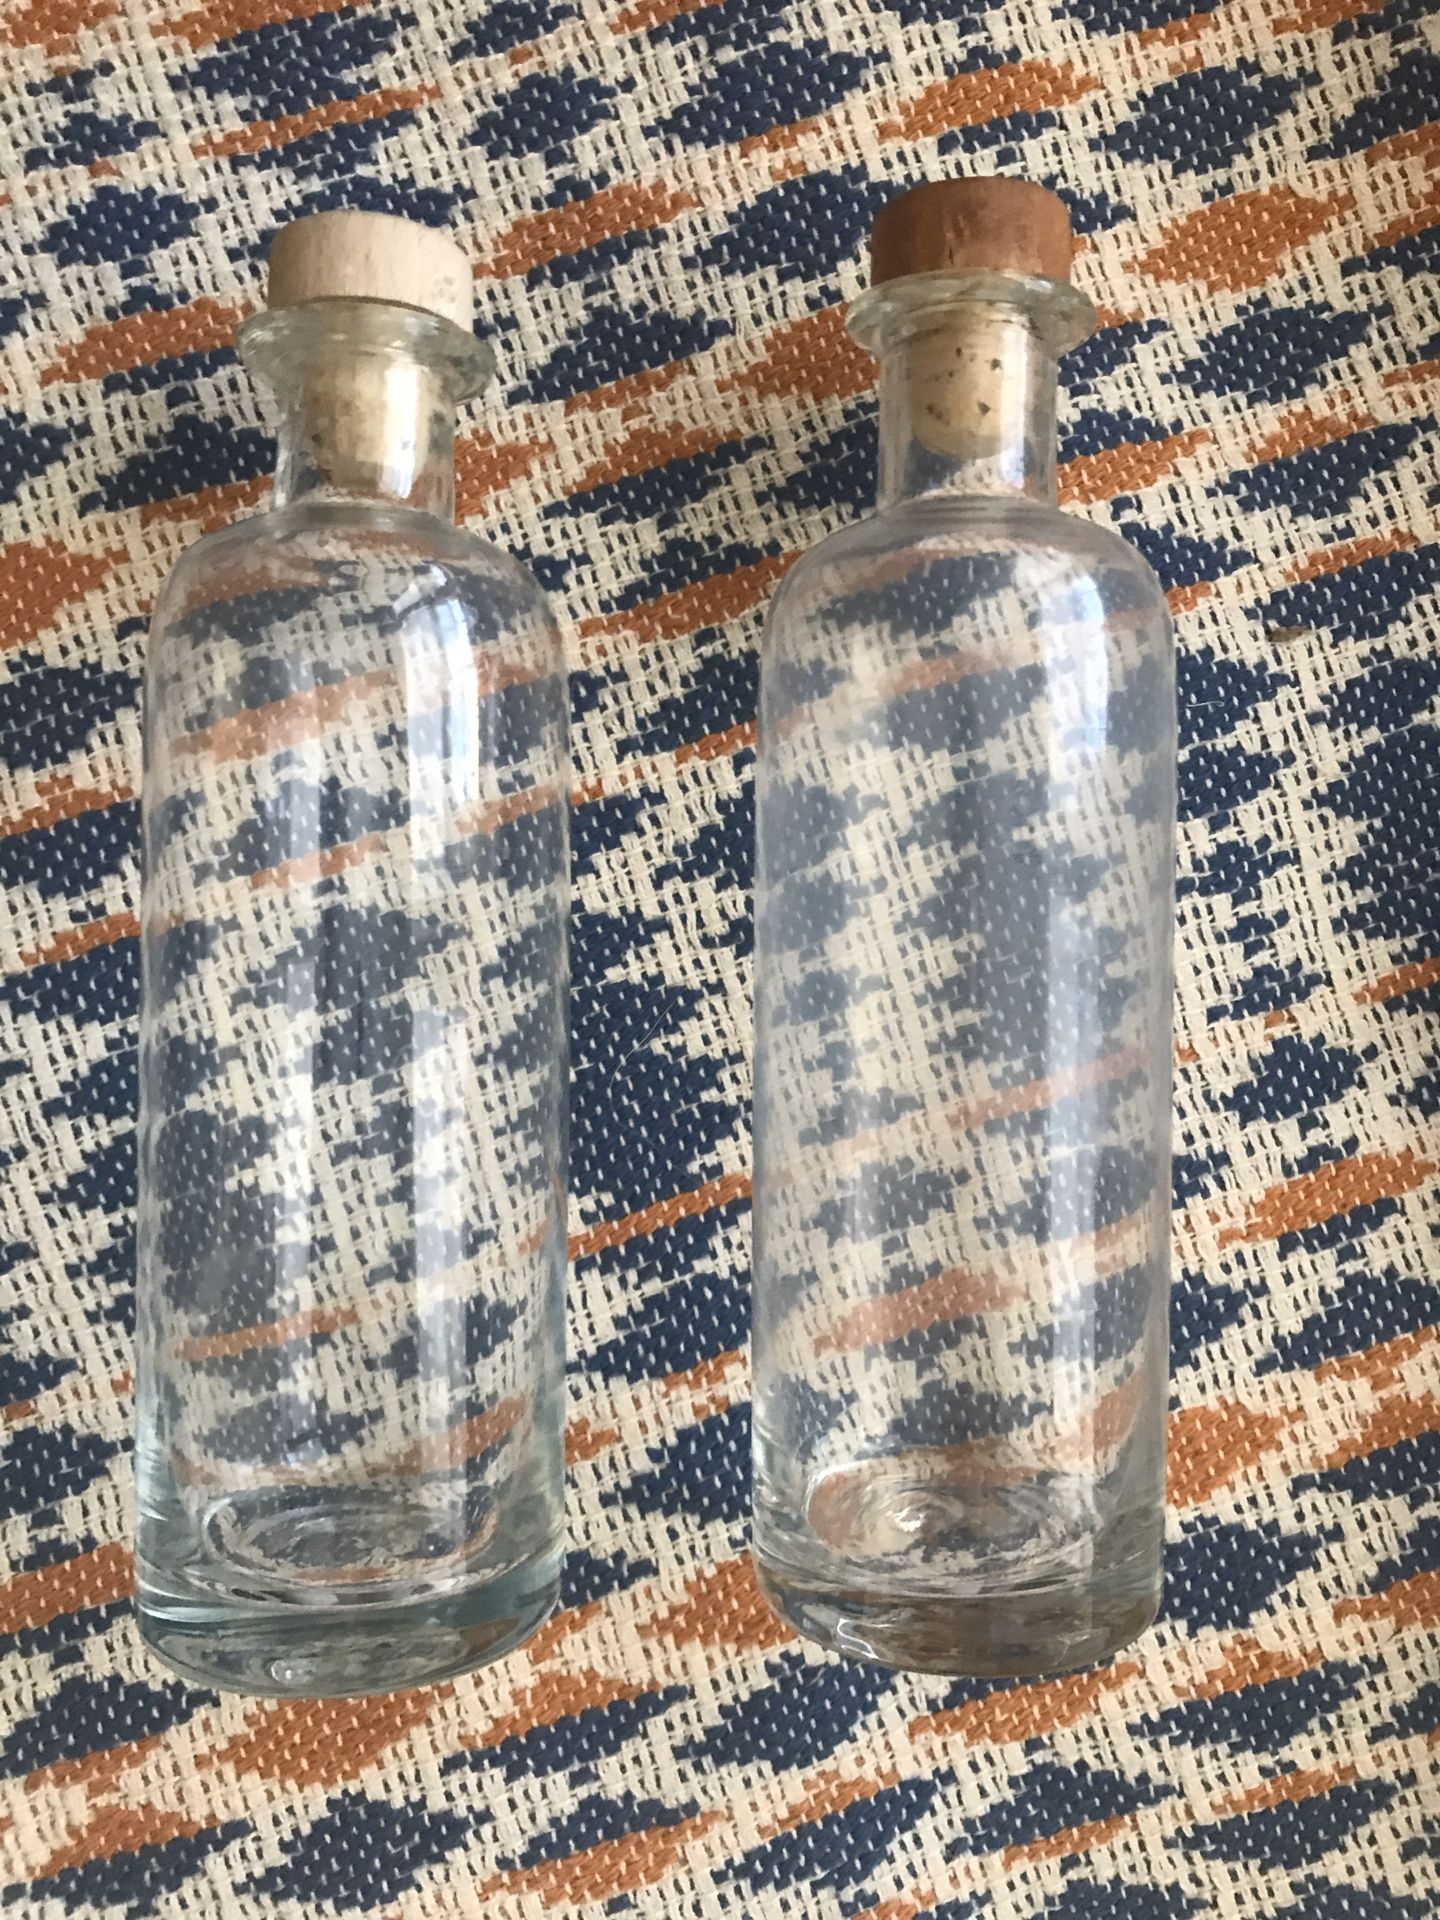 Two glass jars with cork lid